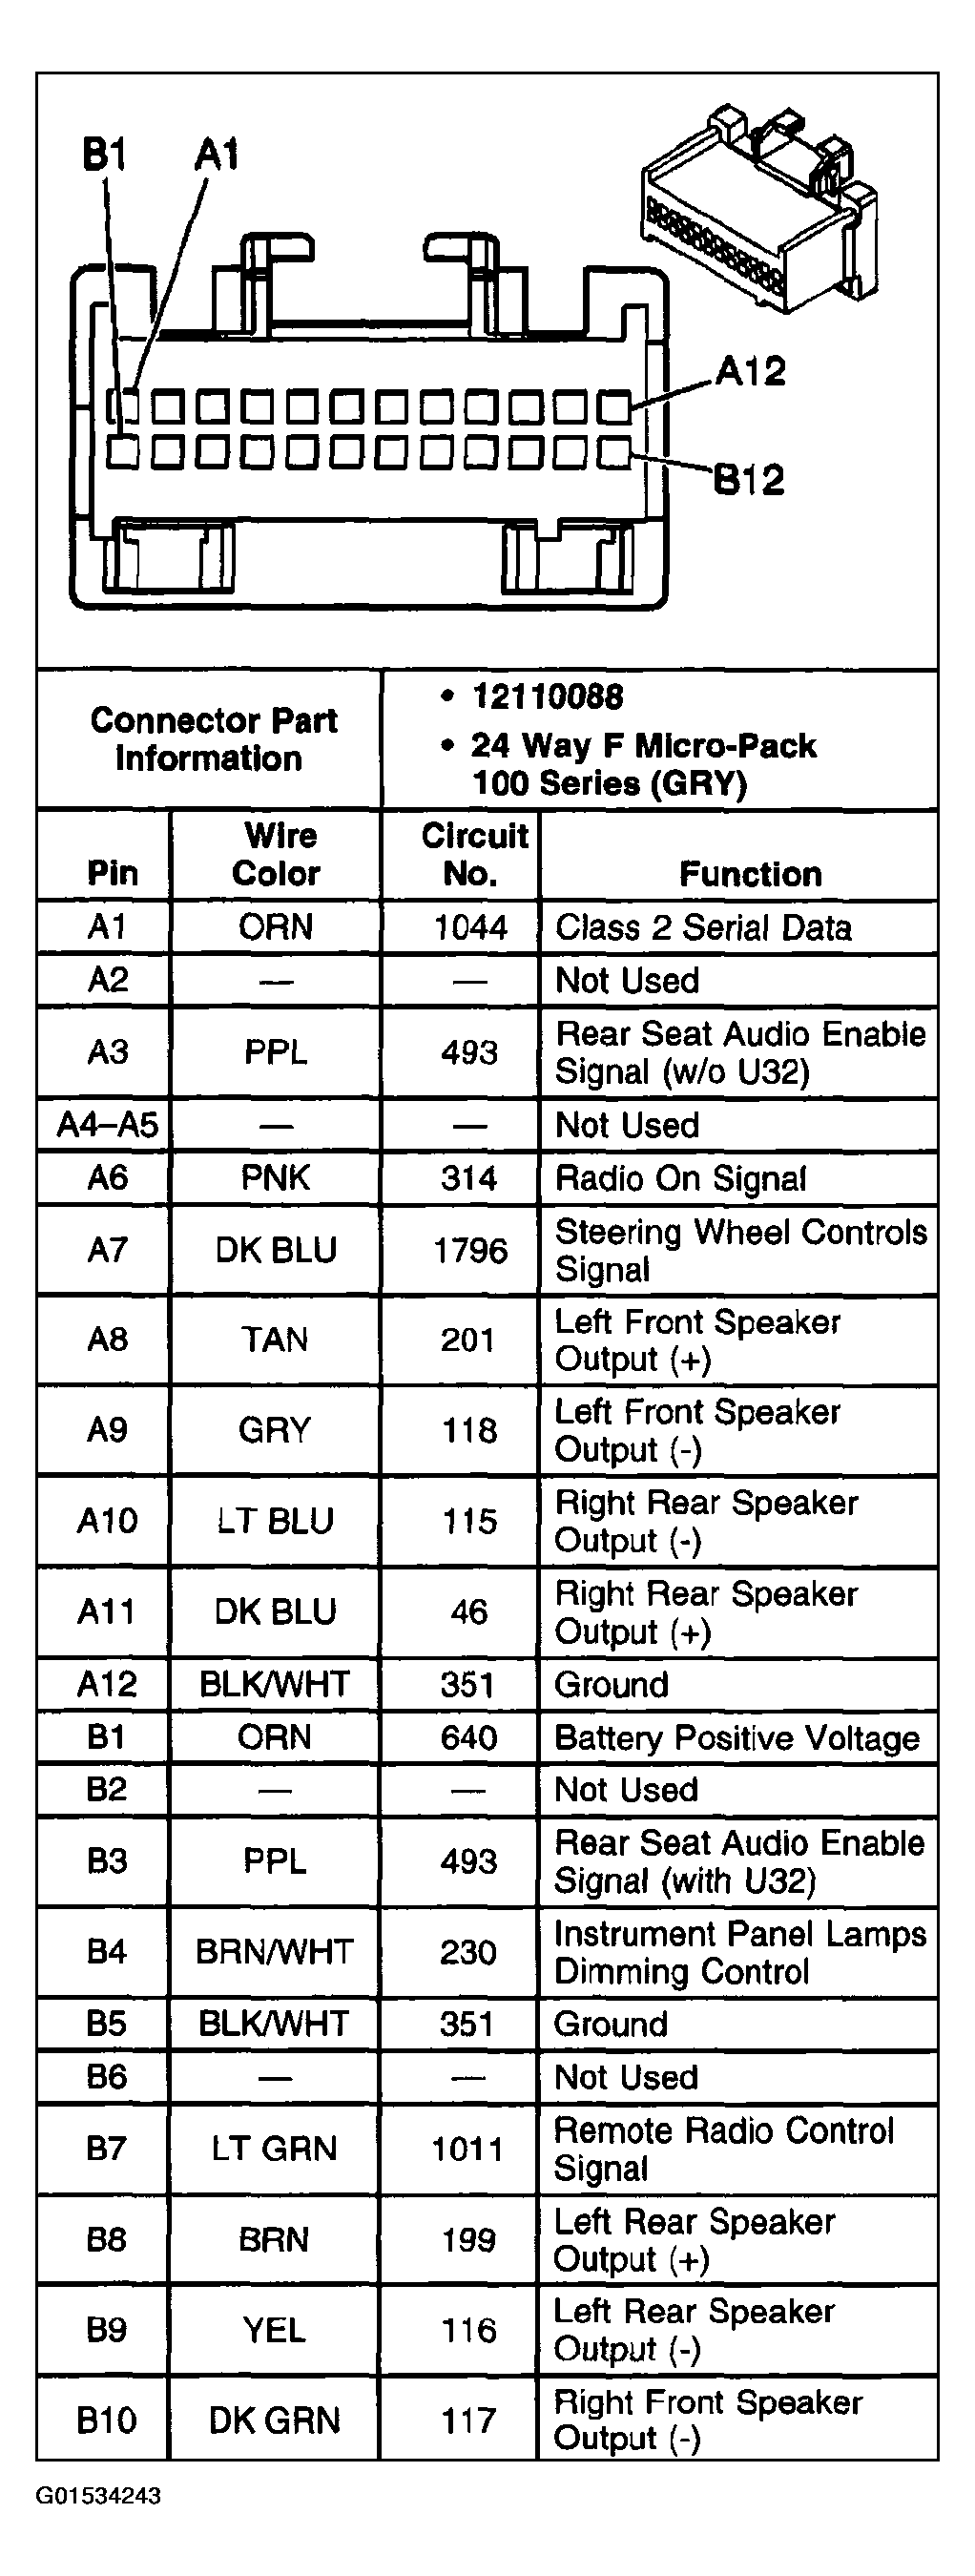 2001 Tahoe Stereo Wiring Diagram from www.2carpros.com